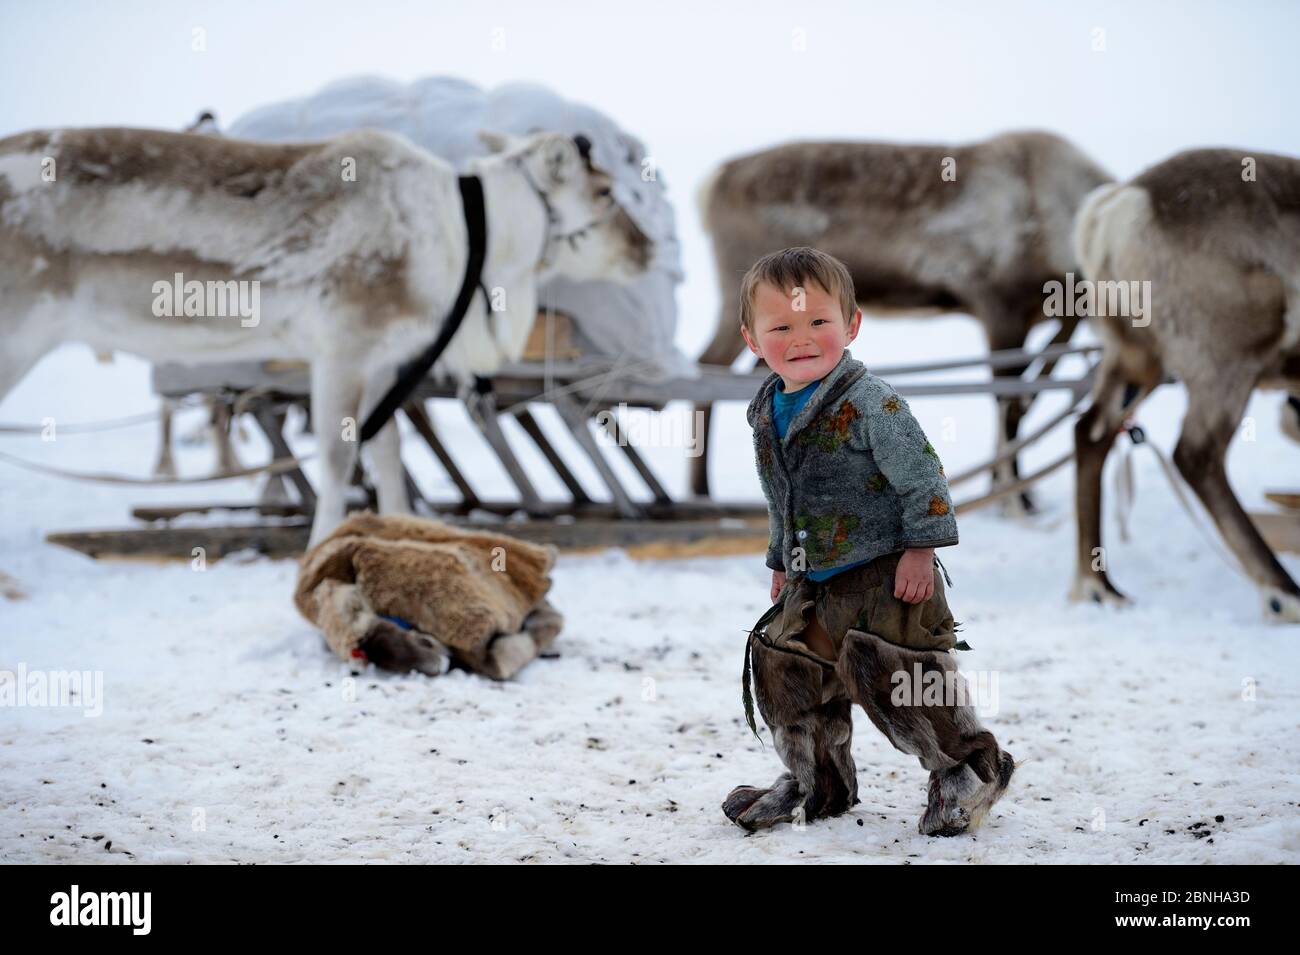 Young Nenet boy at camp wearing traditional winter boots made with reindeer skin. Reindeer (Rangifer tarandus) and sled in background. Yar-Sale distri Stock Photo